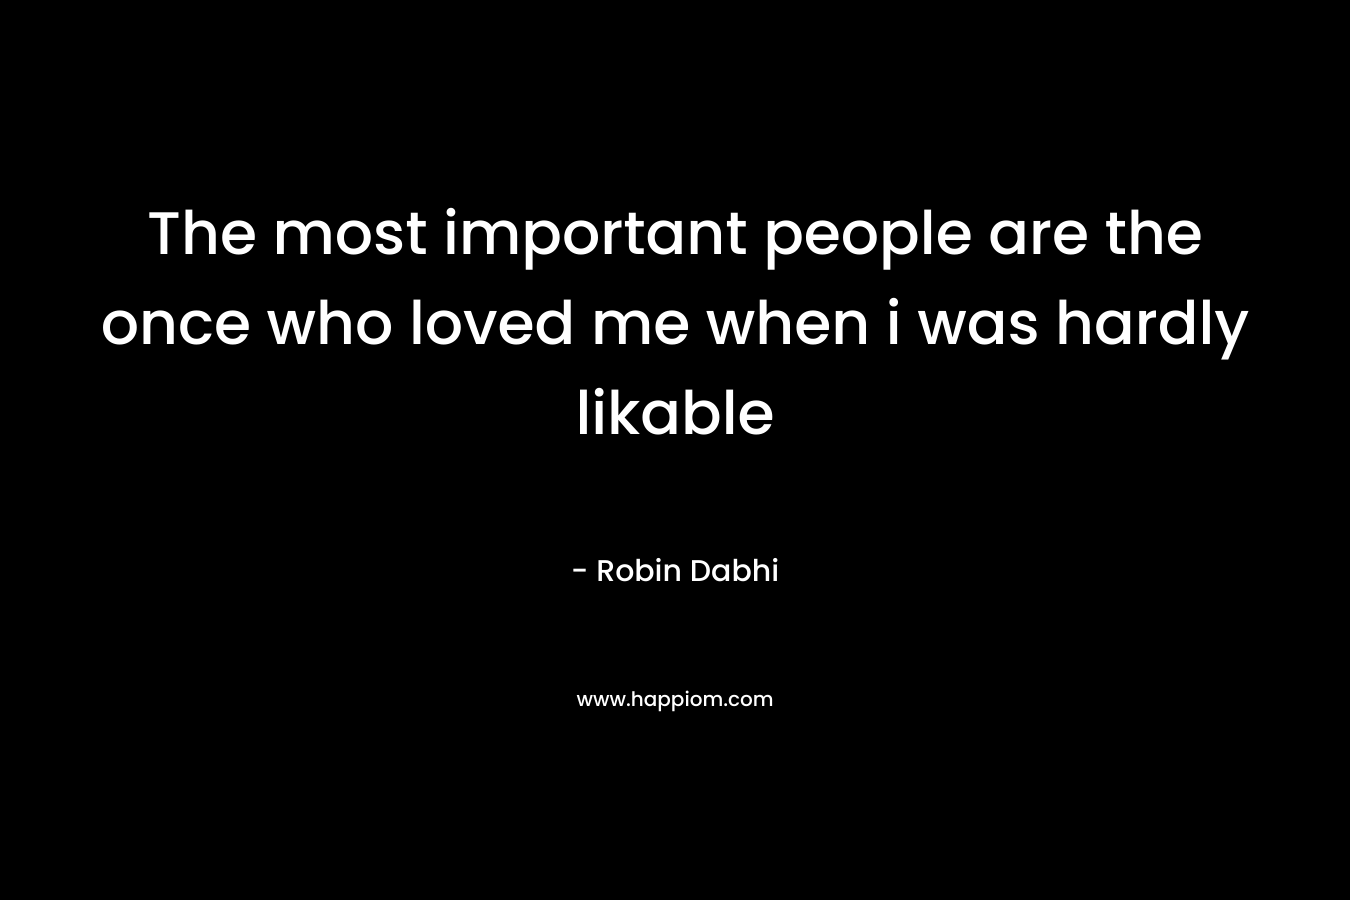 The most important people are the once who loved me when i was hardly likable